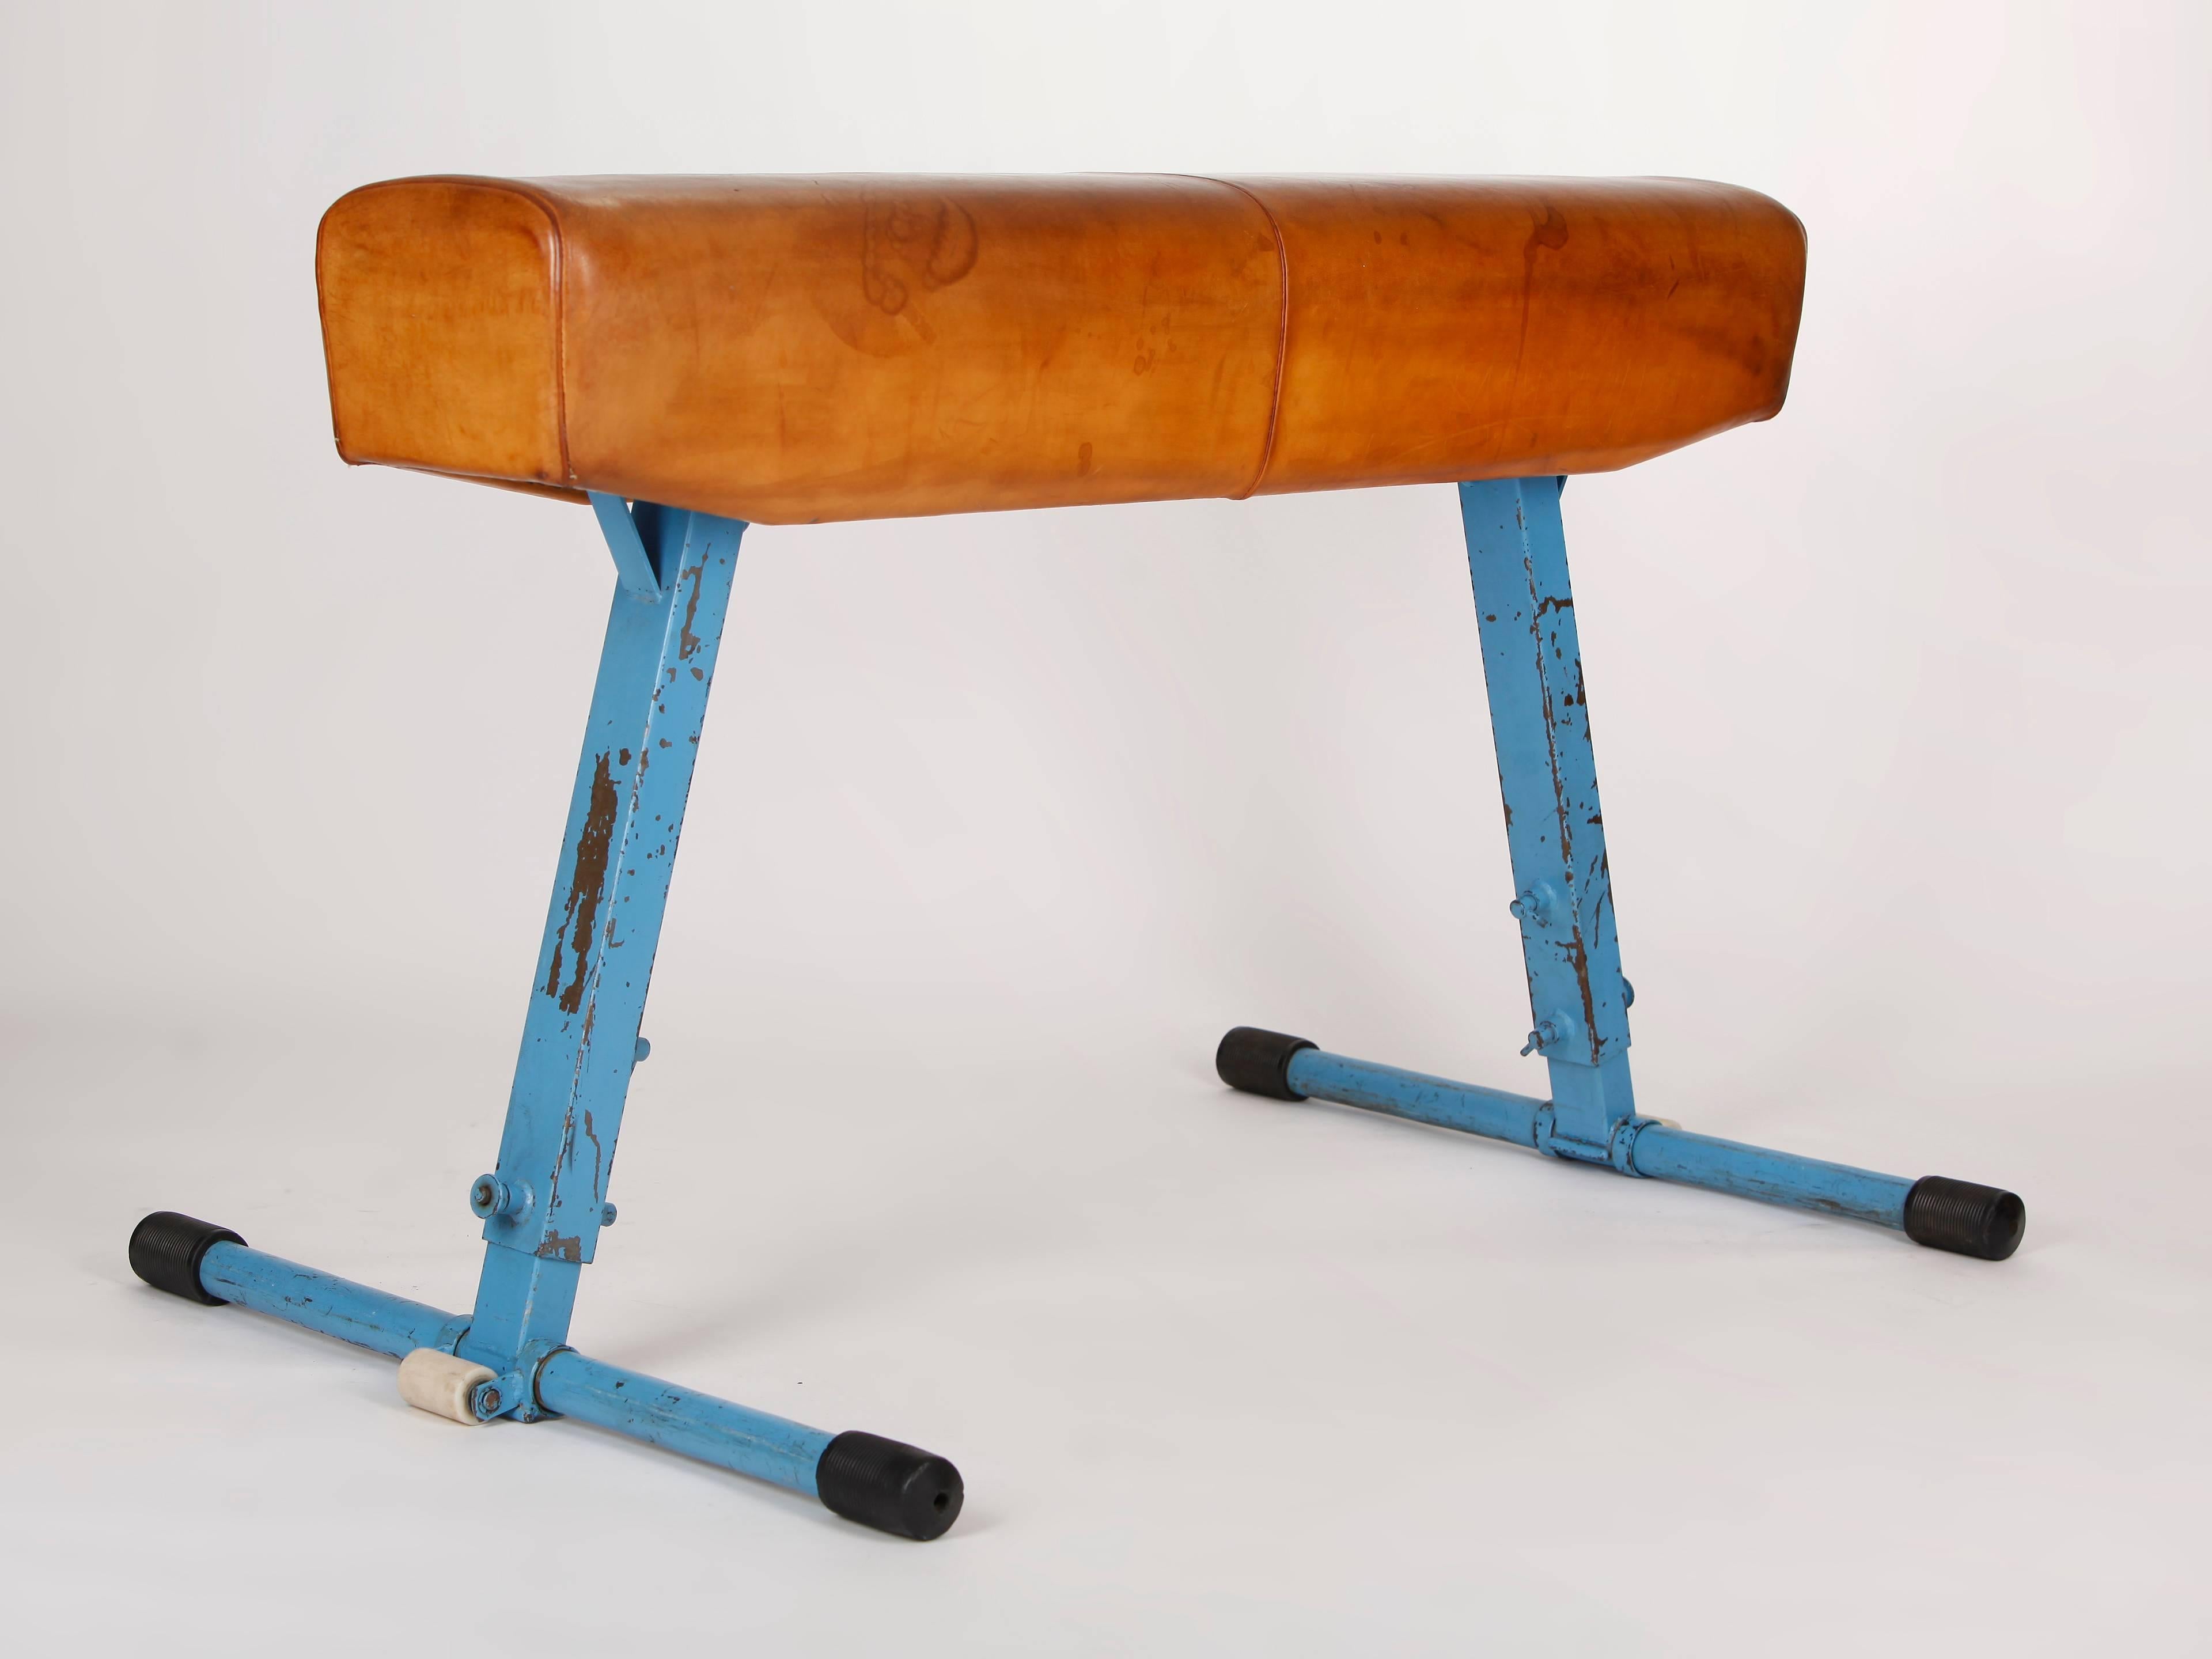 Manufactured by Artis in the 1960s in former Czechoslovakia. Height adjustable construction made of original blue painted steel tubing. The cleaned and preserved thick cowhide has a patina.
 